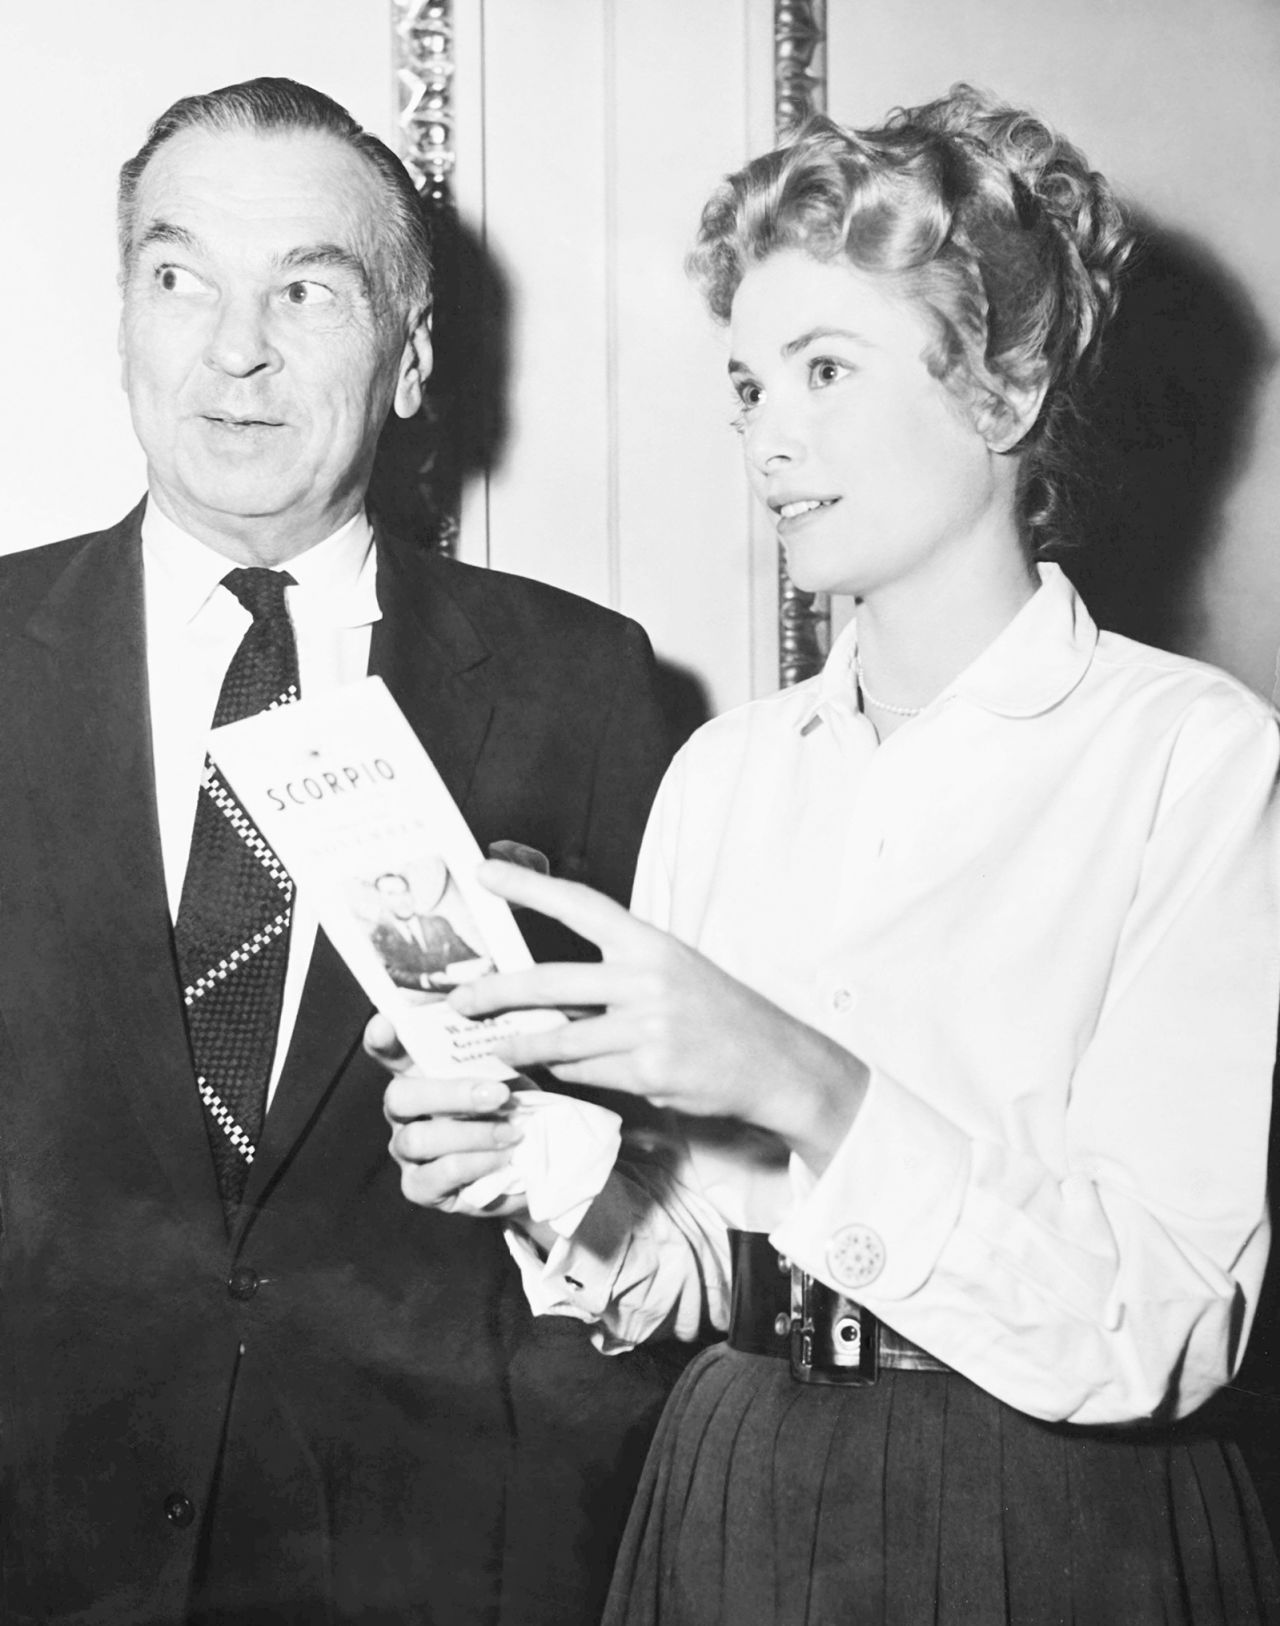 Celebrity astrologer Carrol Righter was documented visiting Grace Kelly on set of "The Swan" in 1956.